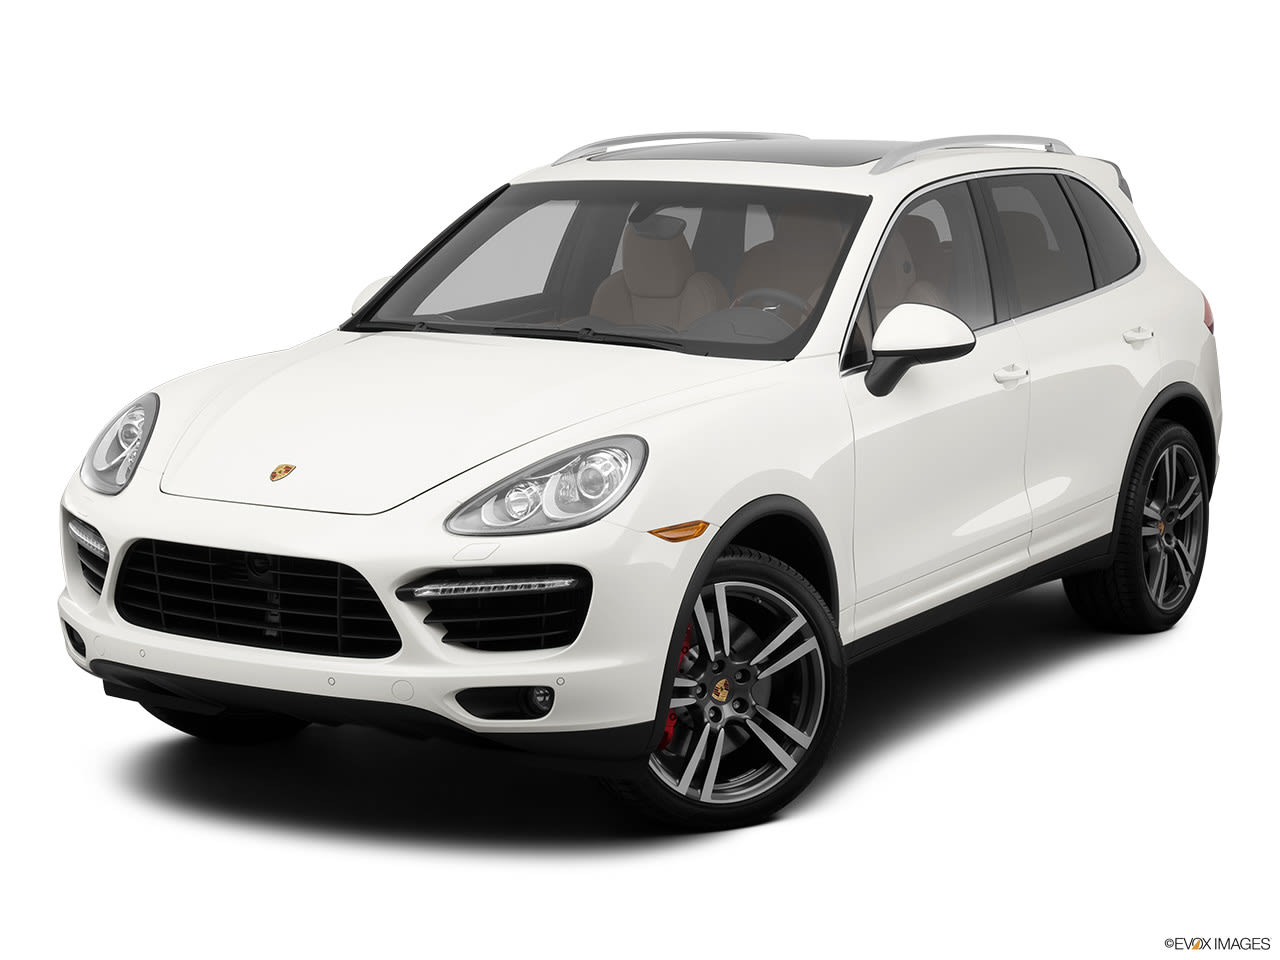 A Buyer's Guide to the 2012 Porsche Cayenne | YourMechanic Advice